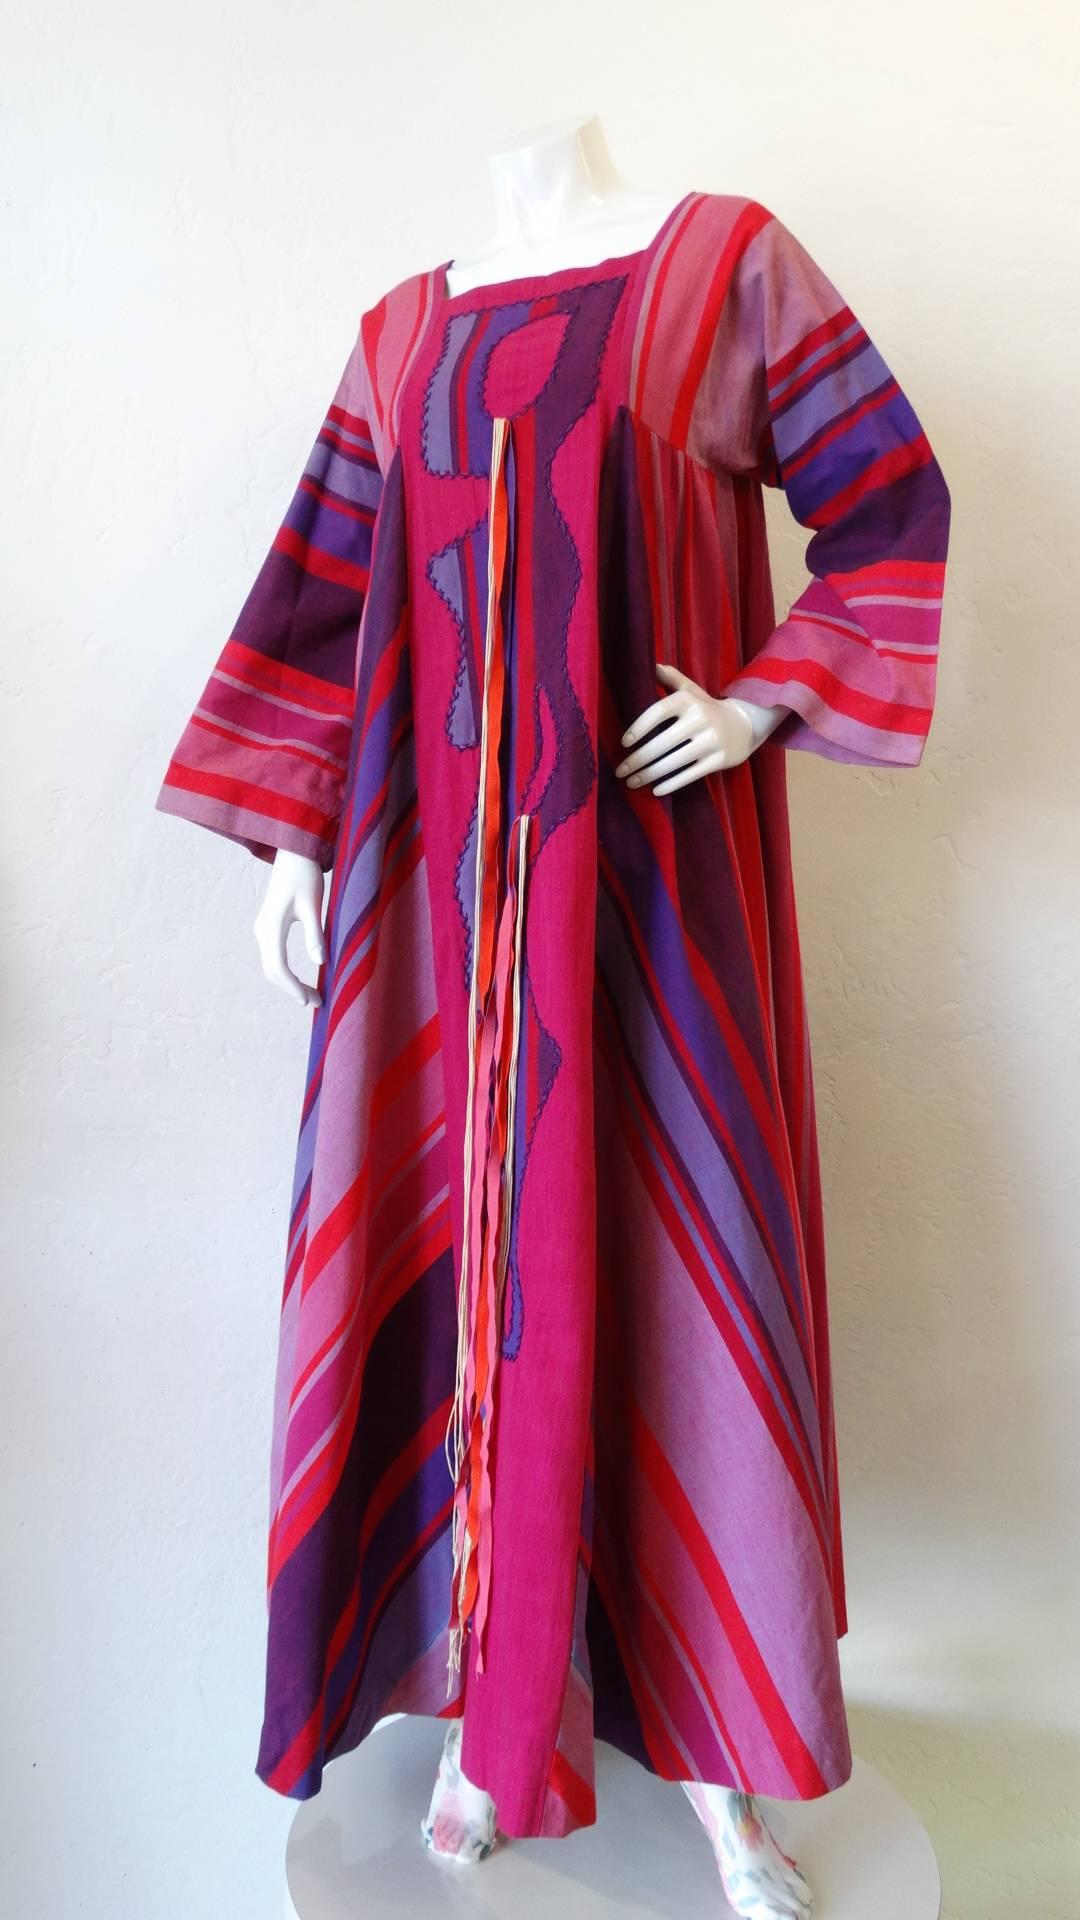 This poolside chic 1970s Roberta Vercellino y Luis kaftan is truly a southwestern gem! Made of a quality woven cotton printed with a multicolored striped pattern, in shades of violet and pink. Abstract shape stitched down the front in a purple